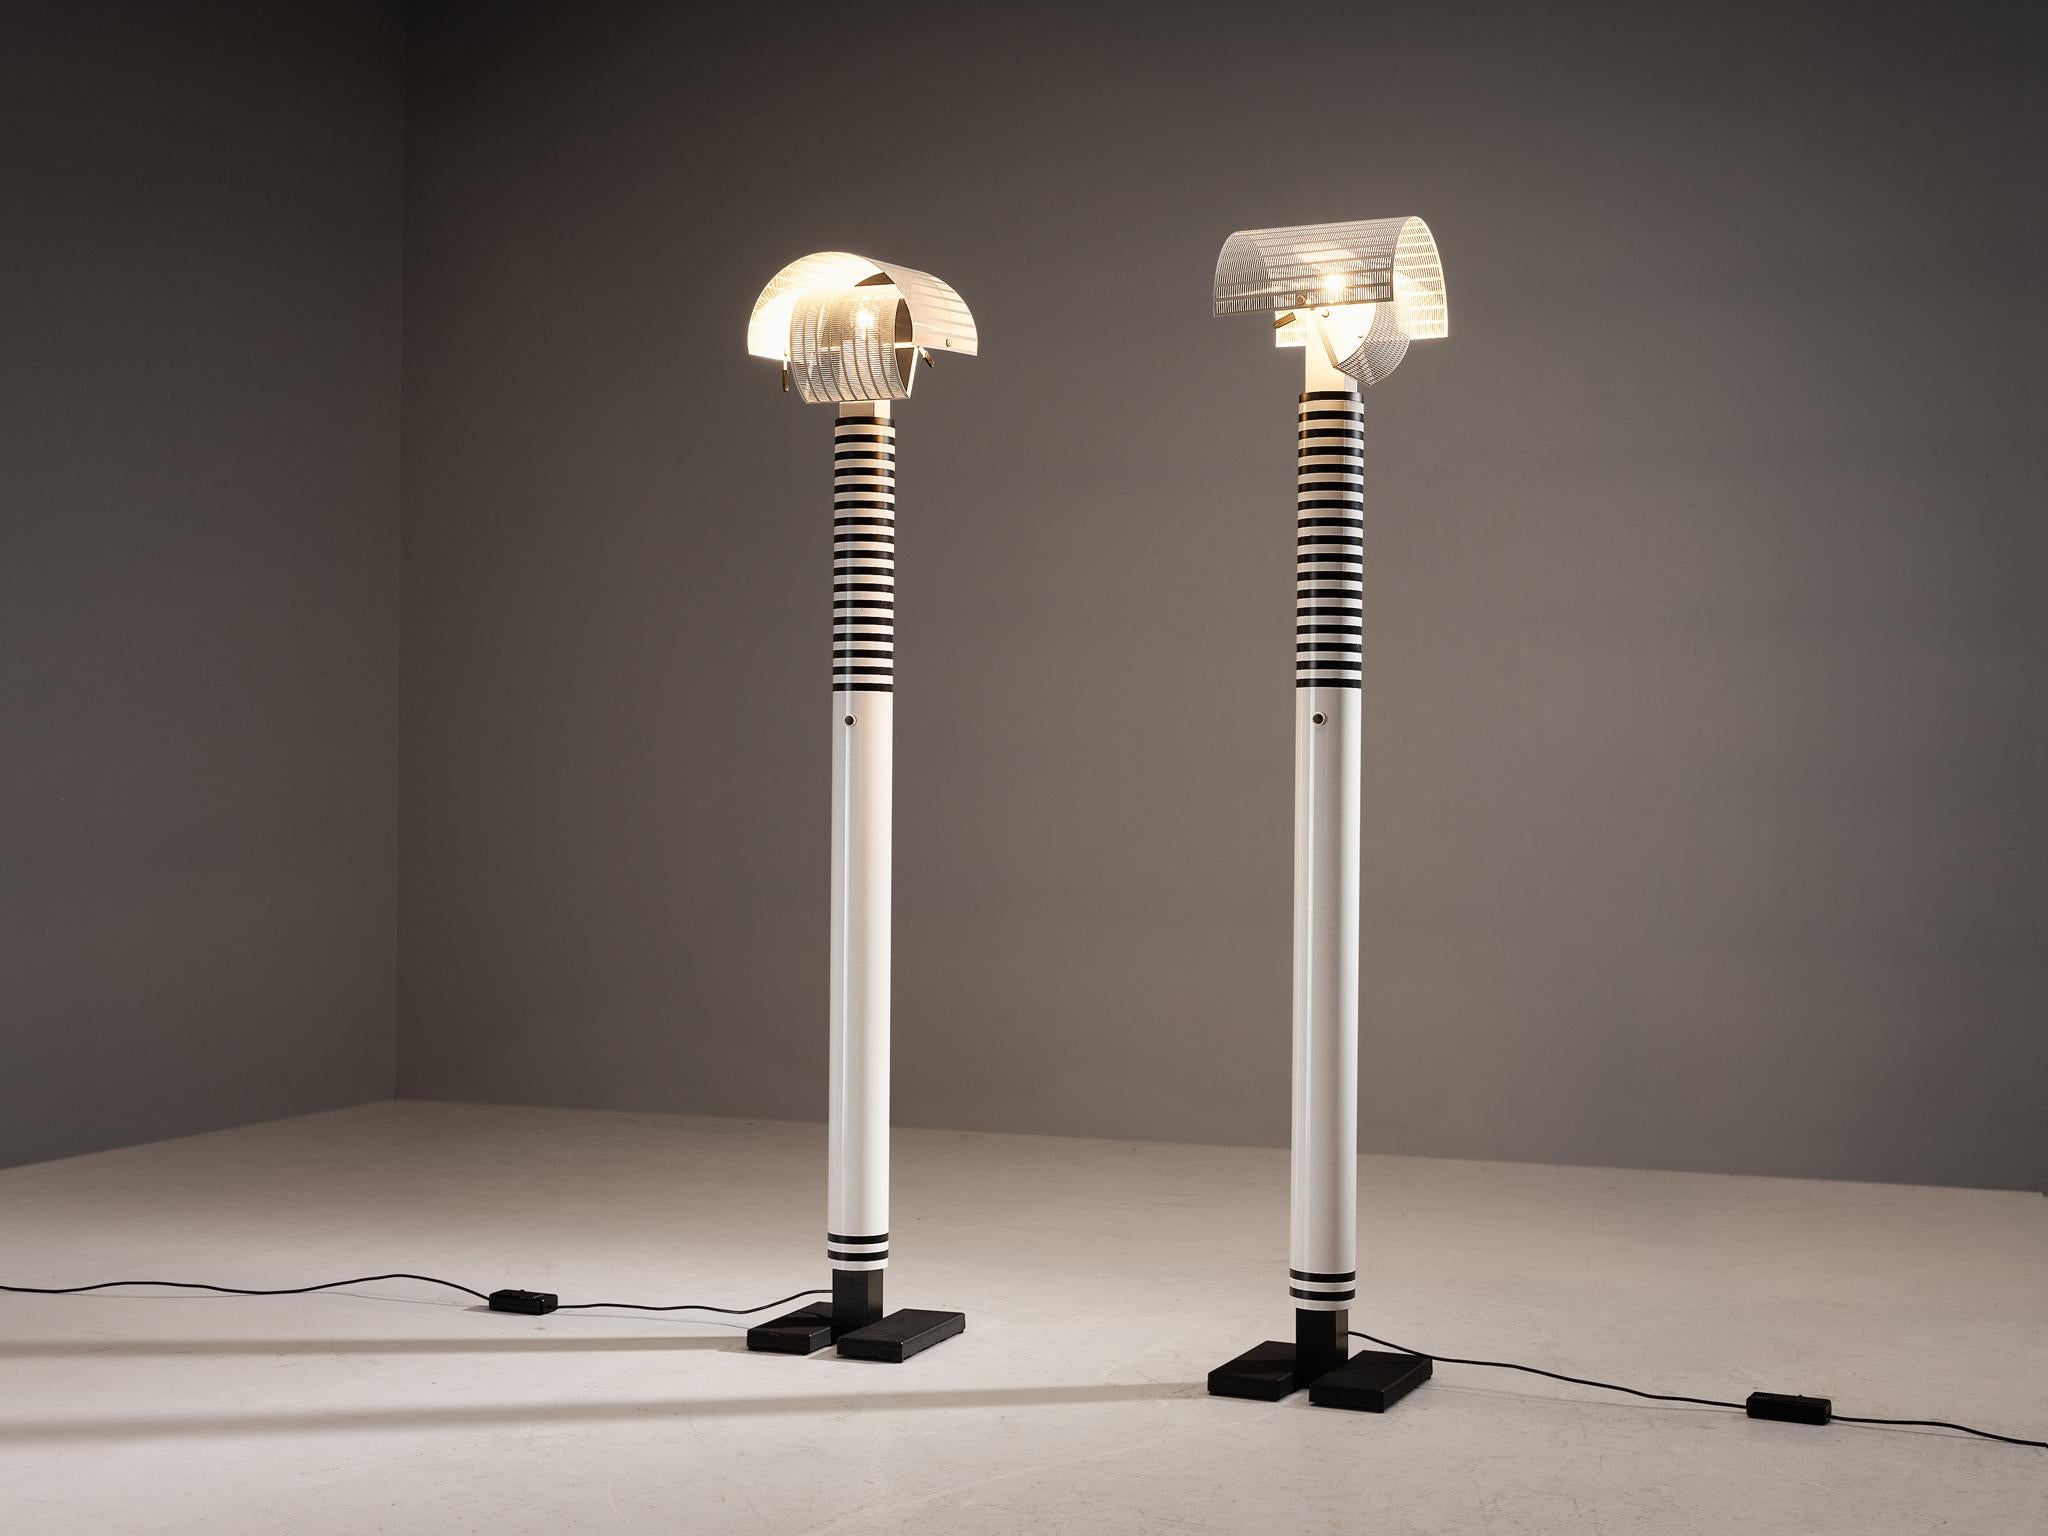 Mario Botta for Artemide, 'Shogun' floor lamps, aluminum, steel, Italy, 1986 

Mario Botta referred to lamps as “people”. He said “Shogun is a person. He has a head, body and feet, plus he has a navel.” The designer is known for his use of geometric